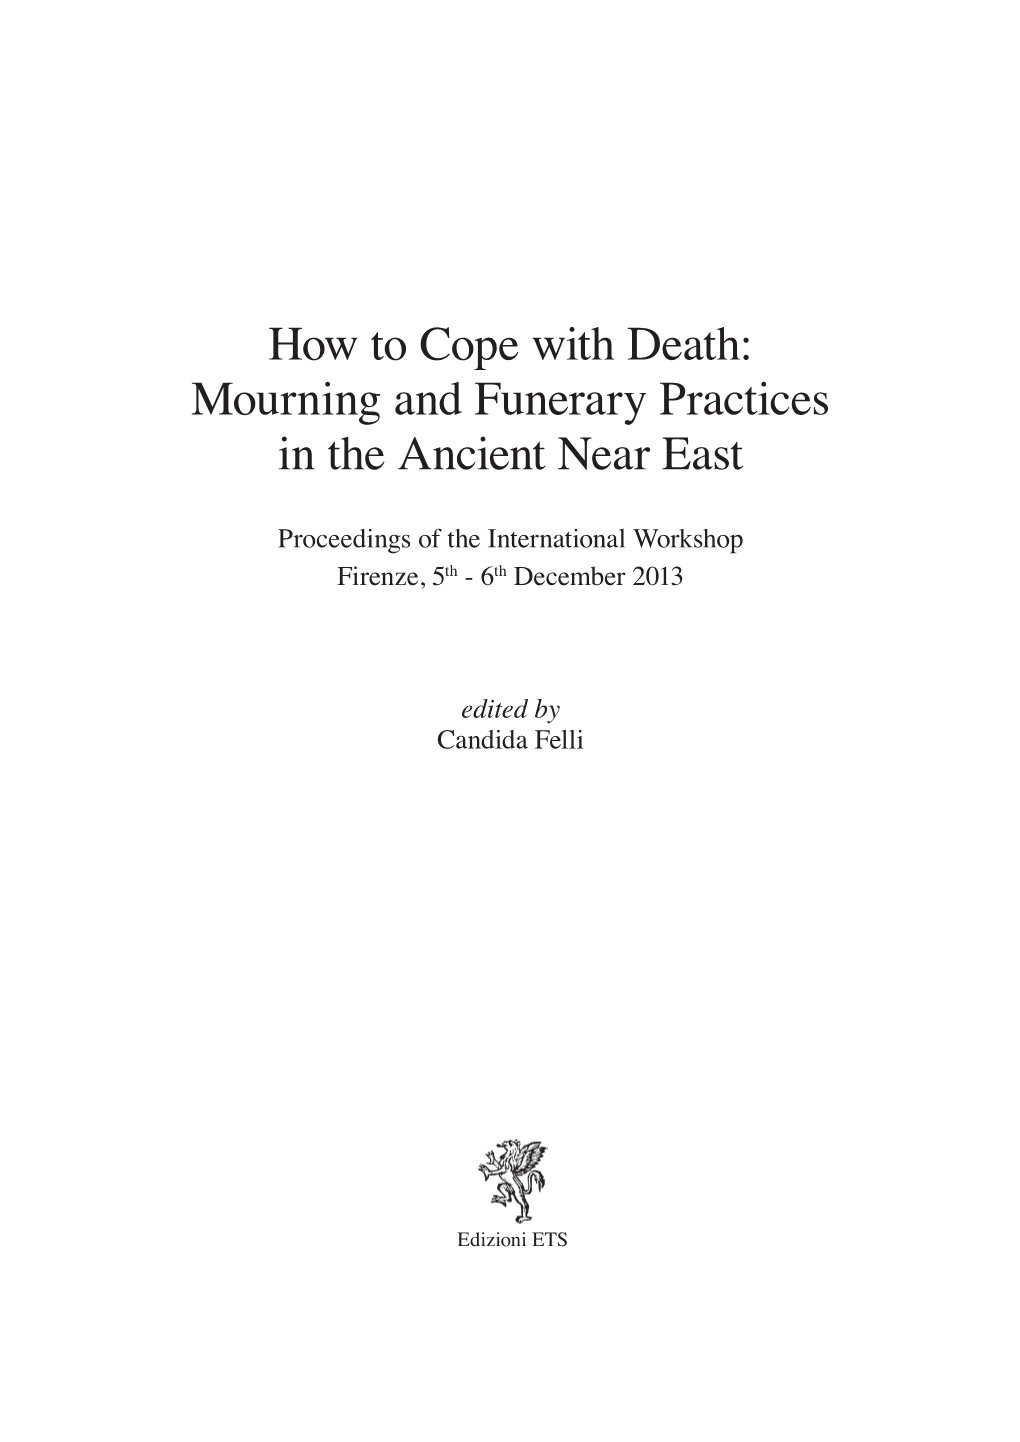 Mourning and Funerary Practices in the Ancient Near East